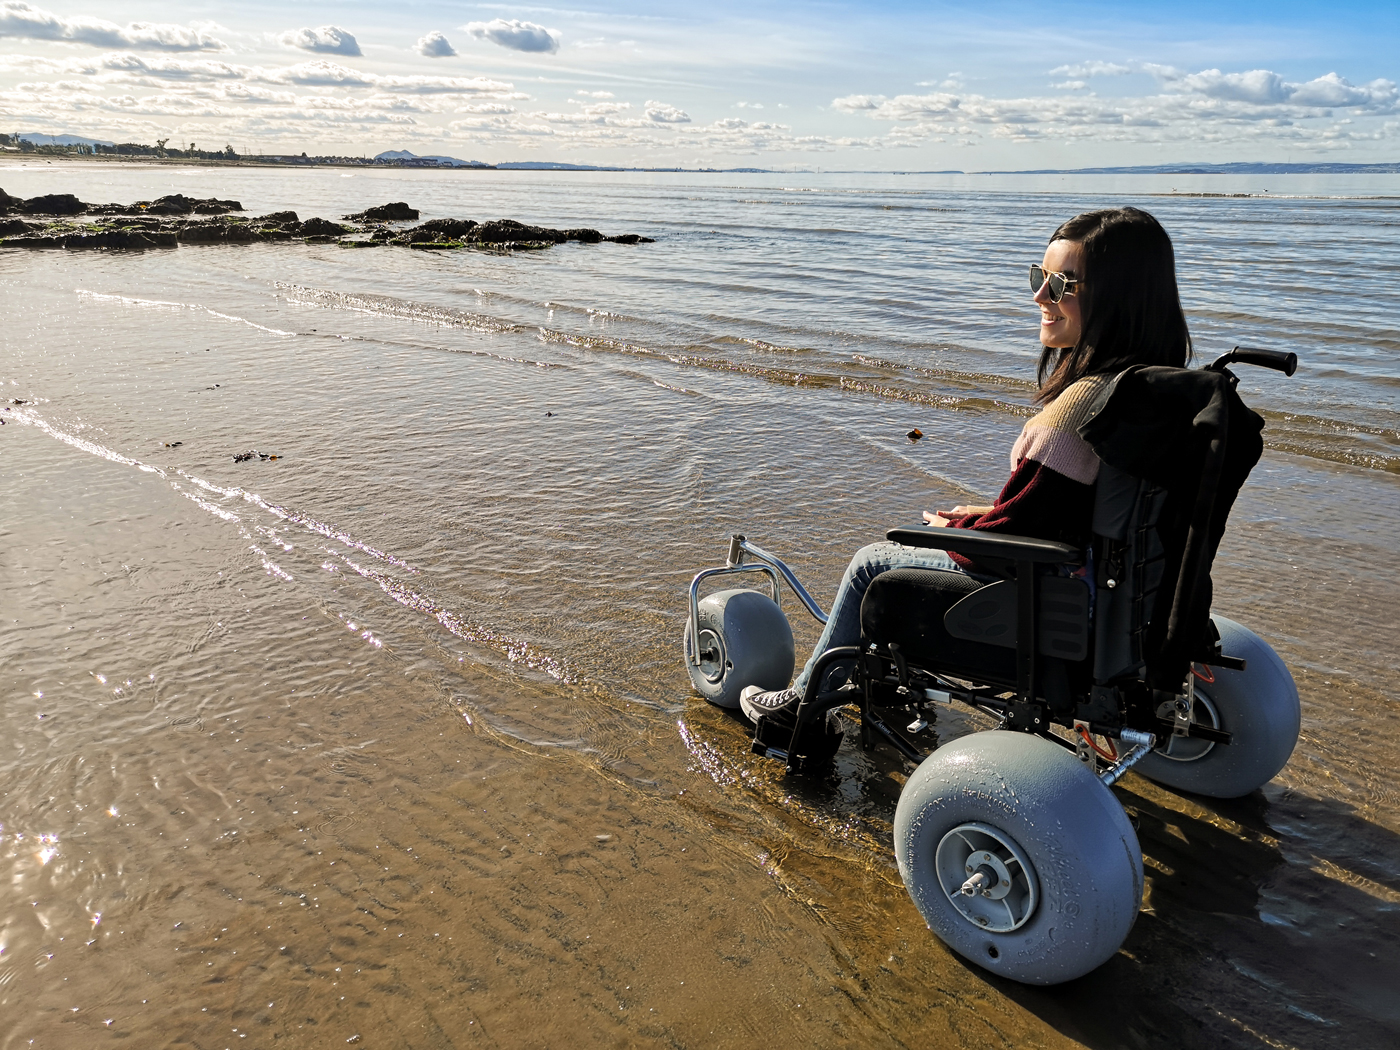 Emma sitting in a beach wheelchair on the beach at the edge of the water. Emma is looking out to the sea smiling.